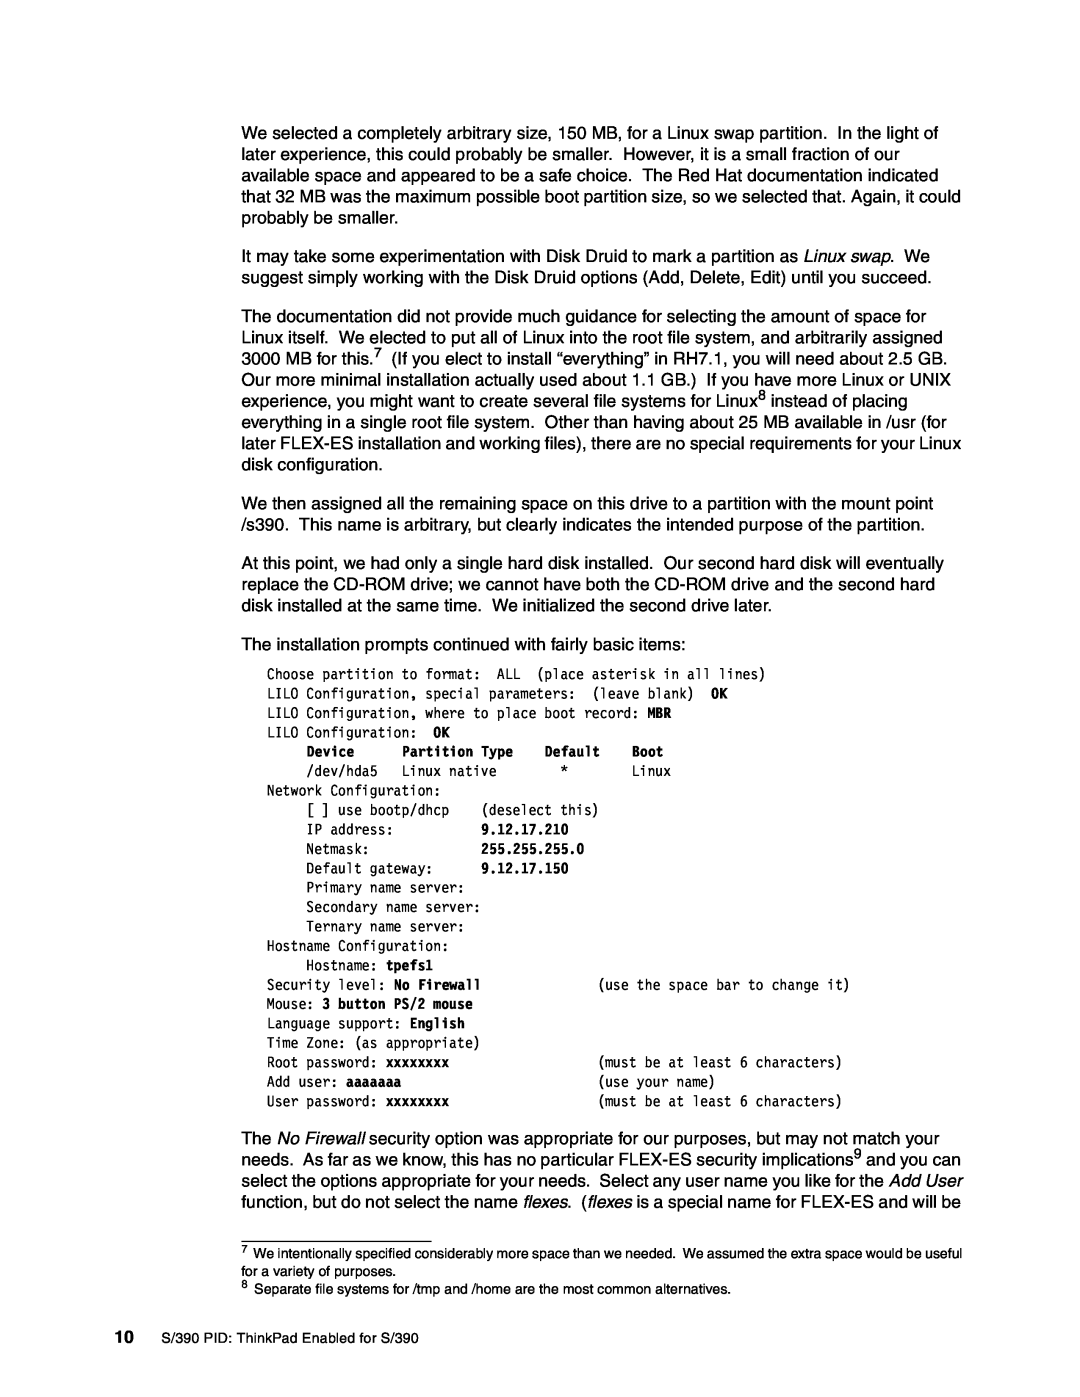 IBM s/390 manual The installation prompts continued with fairly basic items 